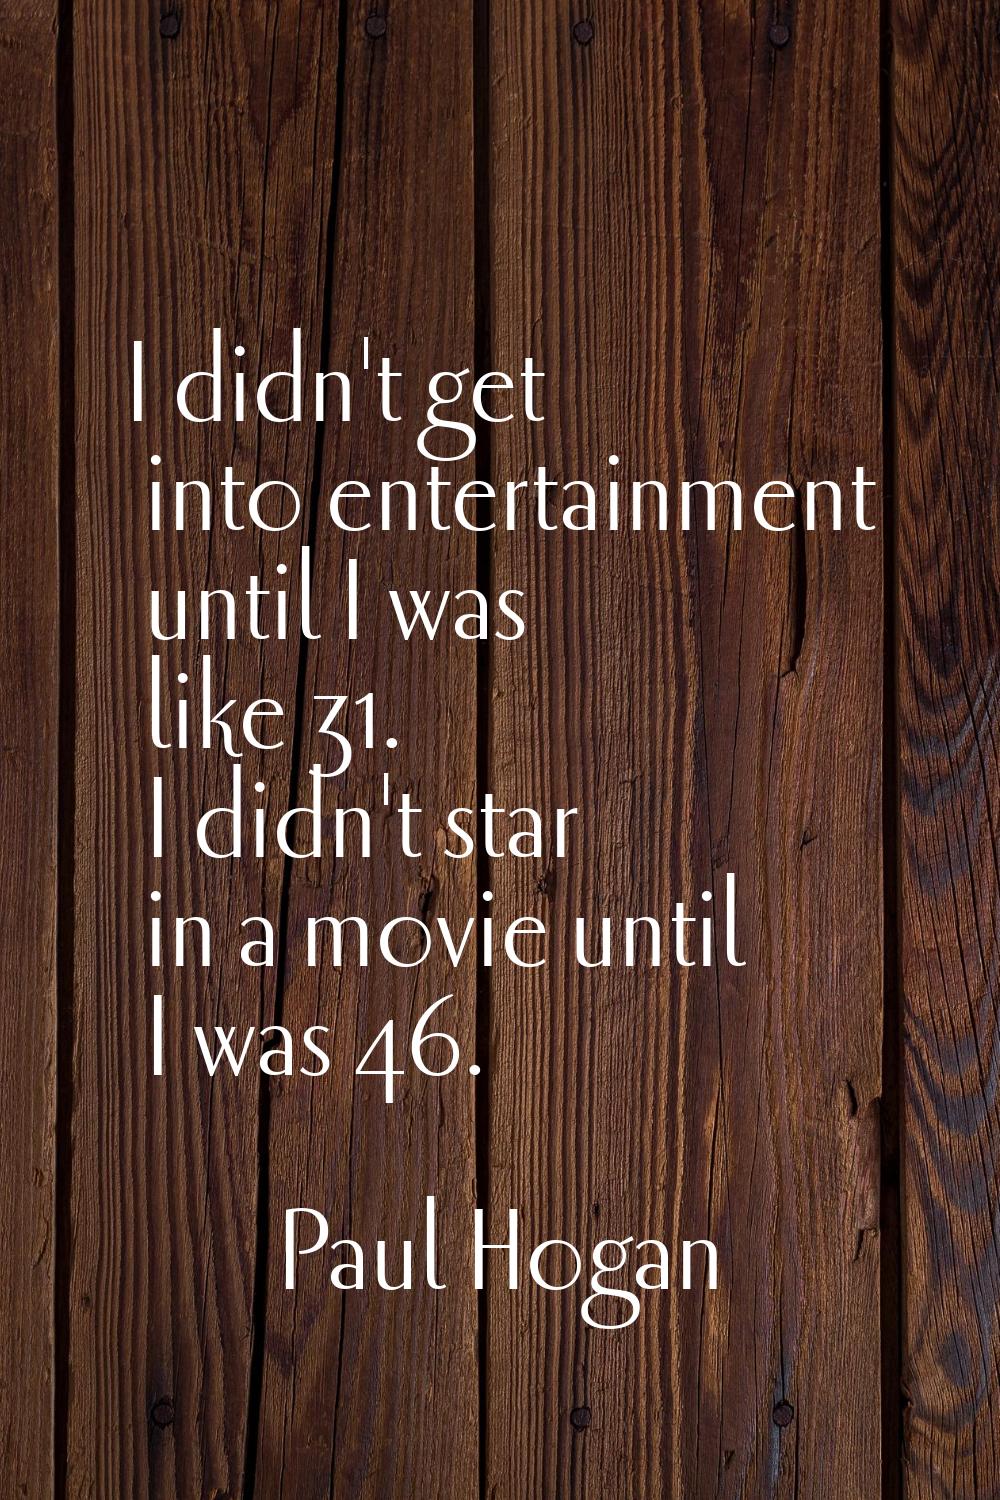 I didn't get into entertainment until I was like 31. I didn't star in a movie until I was 46.